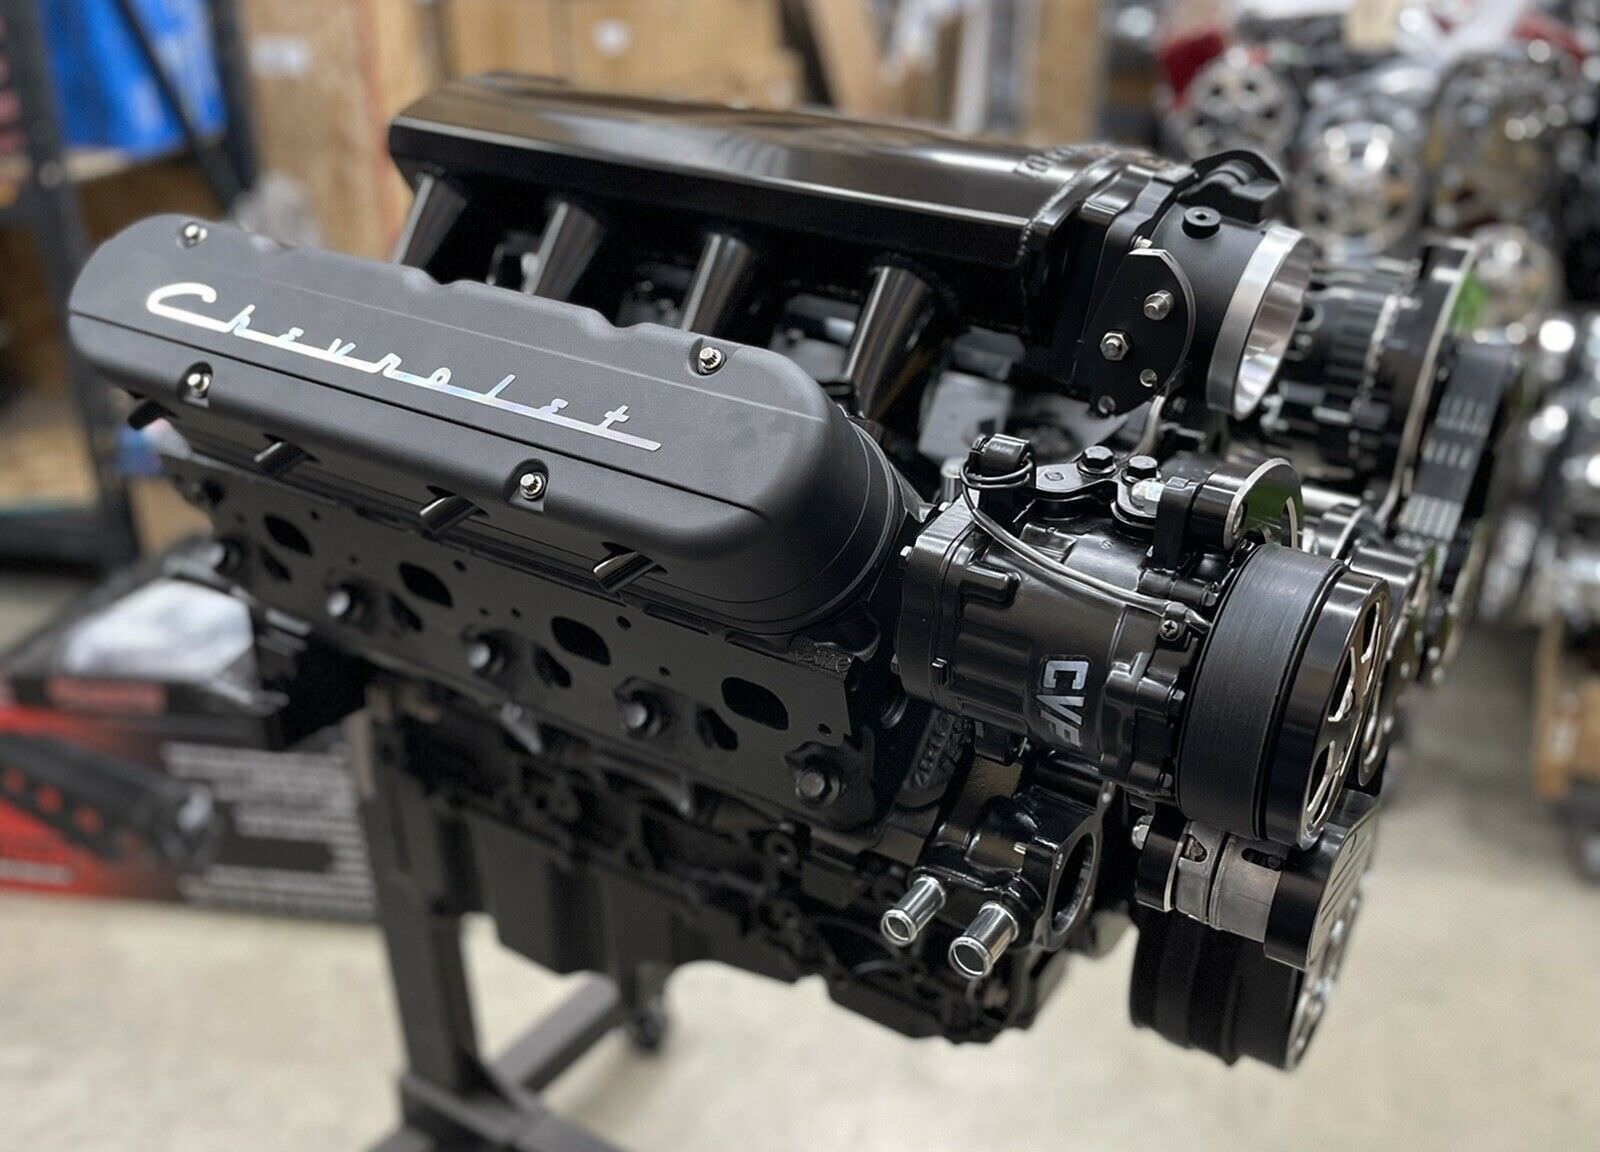 A 600 BHP Chevrolet LS V8 Crate Motor From The Hot Rod Company